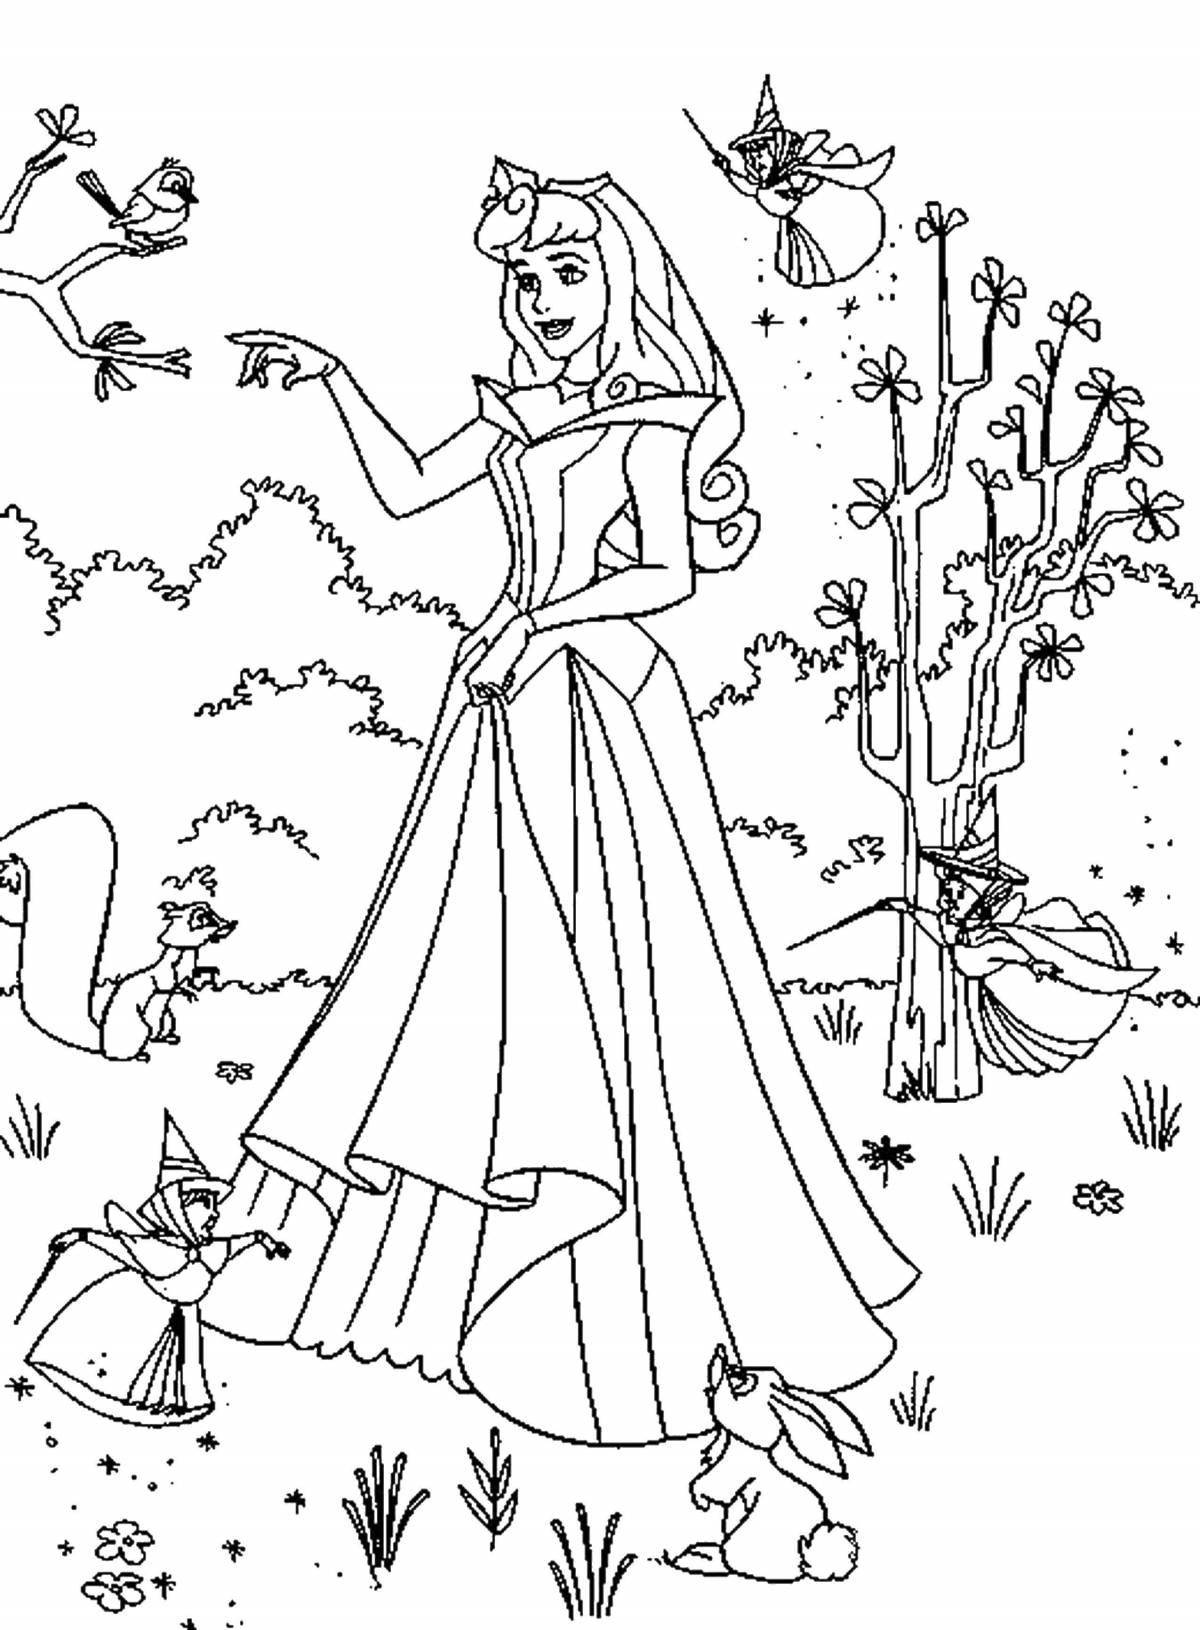 Sparkly sleeping beauty coloring book for kids